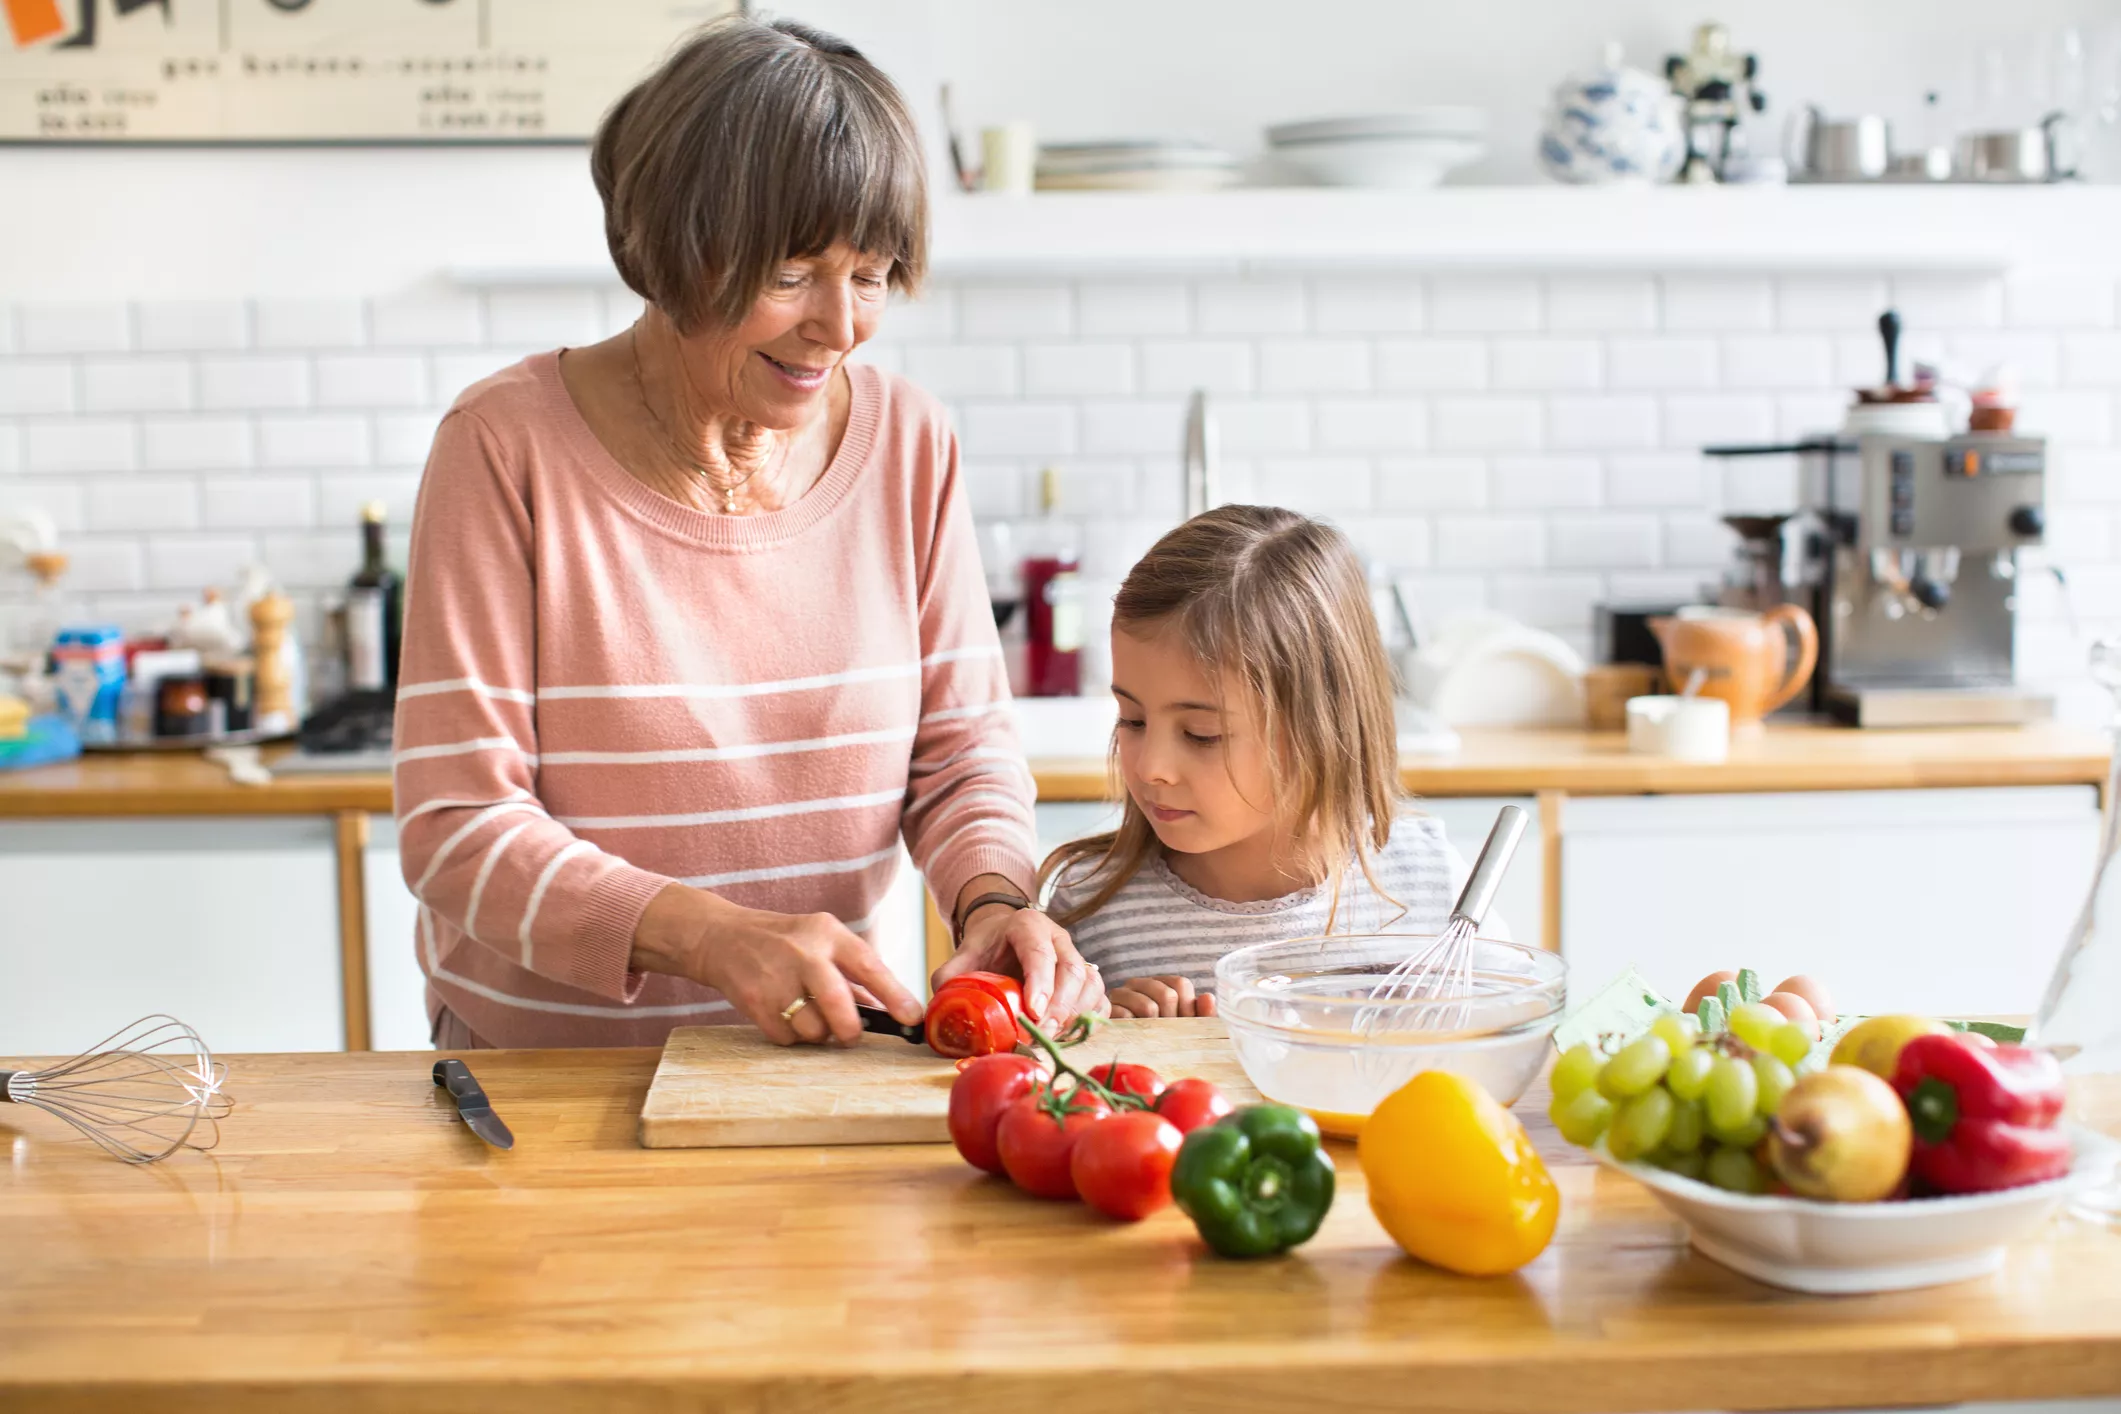 Senior woman with her granddaughter chopping vegetables in kitchen